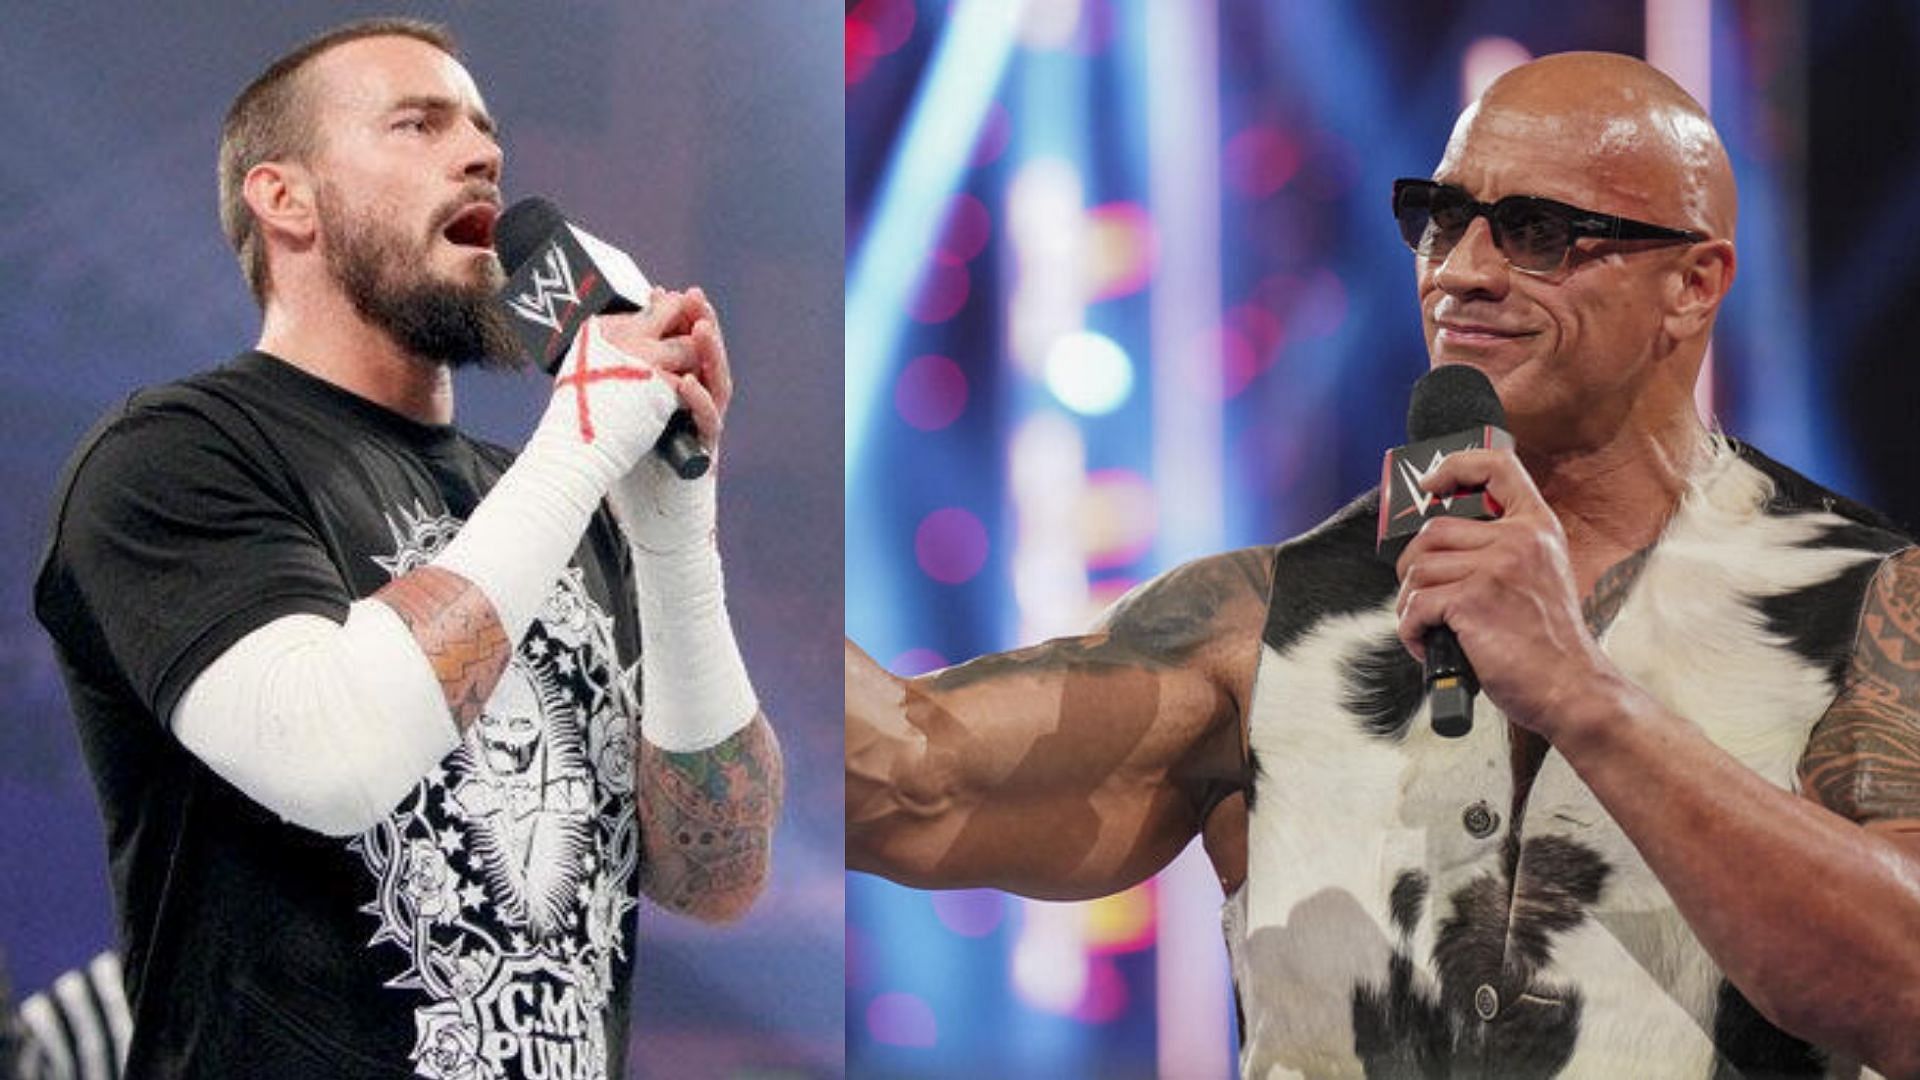 The Rock and CM Punk are no strangers to one another